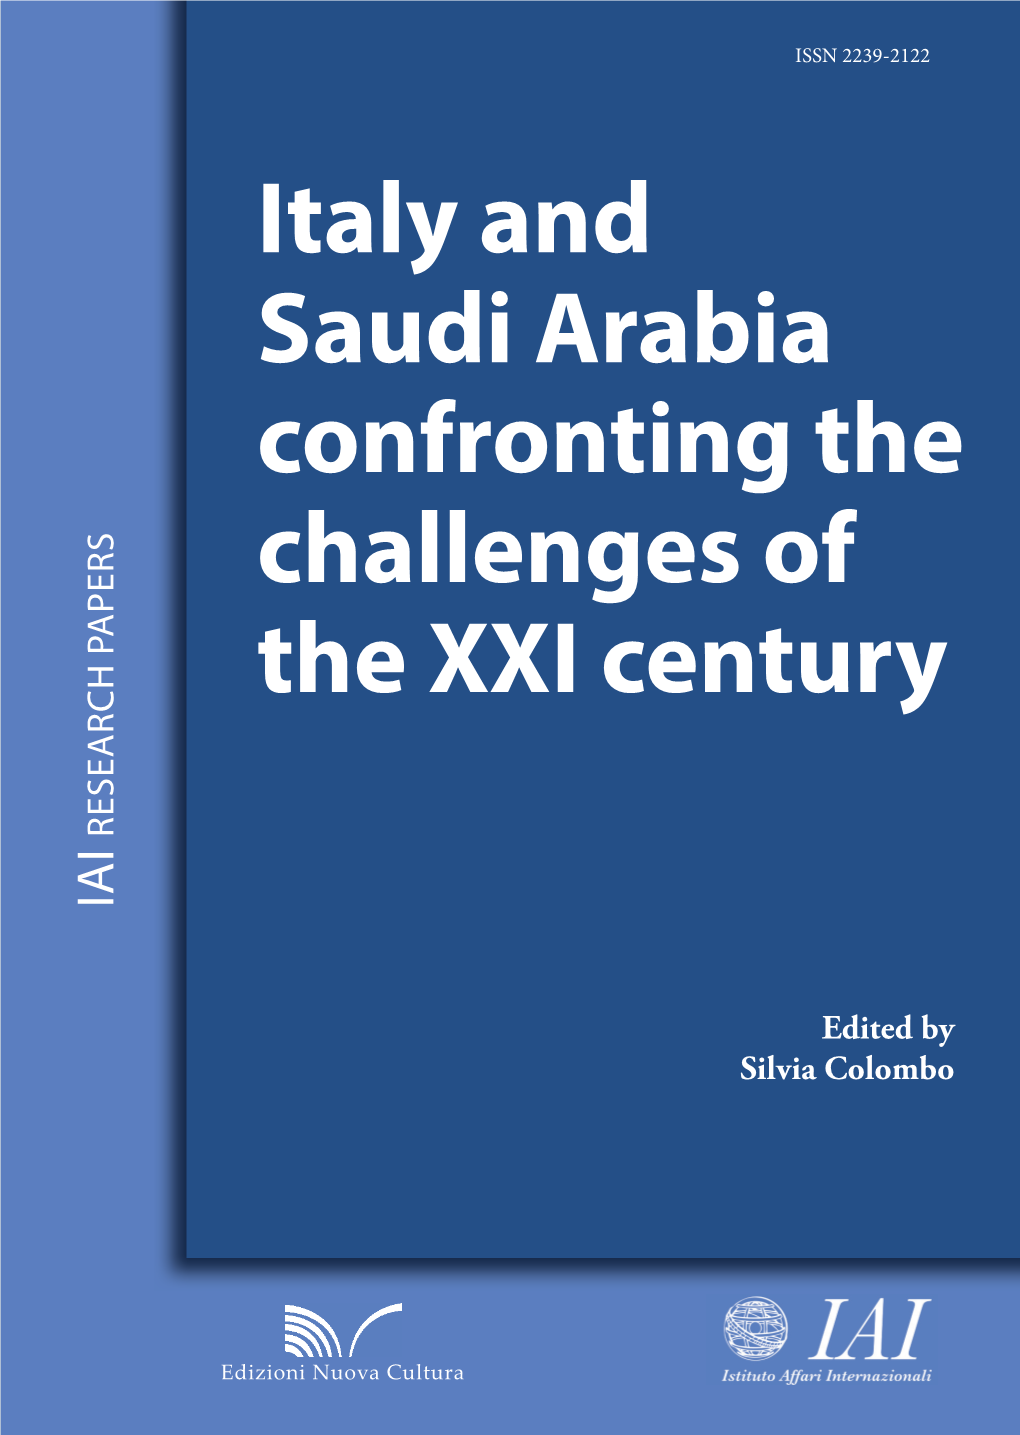 Italy and Saudi Arabia Confronting the Challenges of the XXI Century, Edited by Silvia Colombo, 2013 Edited by Silvia Colombo Silvia Colombo 9788868121518 136 LN 02